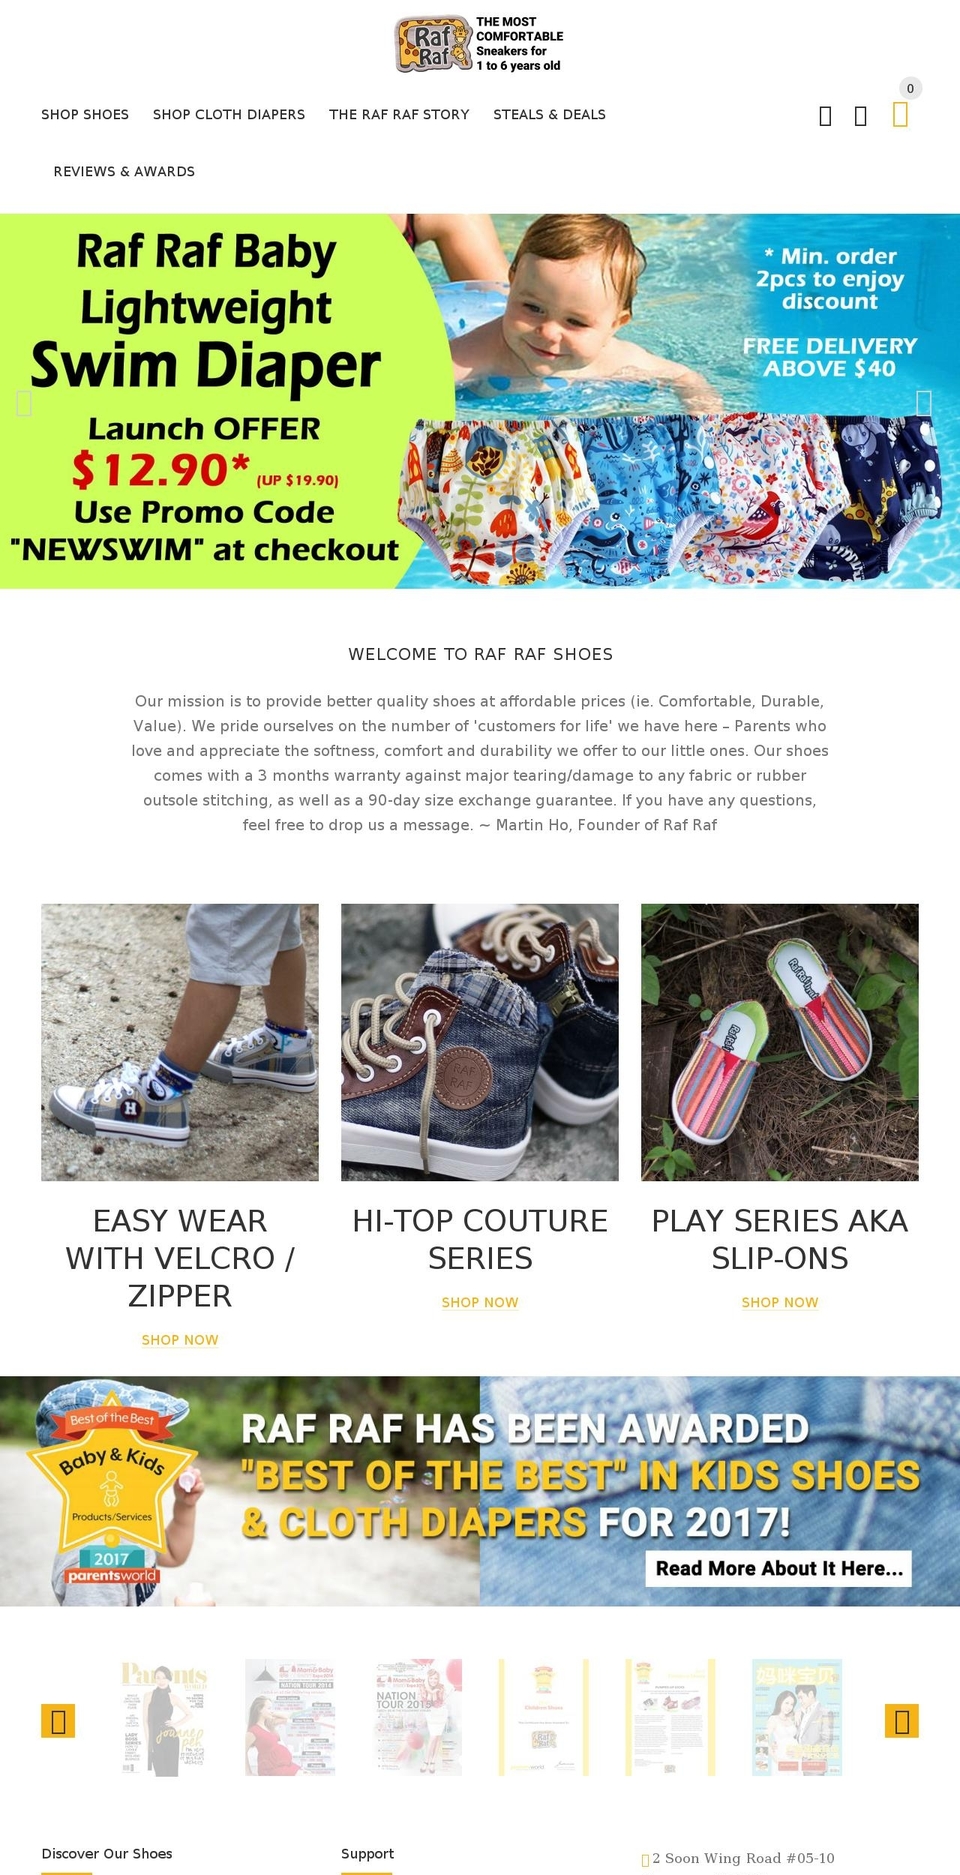 install-me-yourstore-v2-1-7 Shopify theme site example rafrafbabyshoes.com